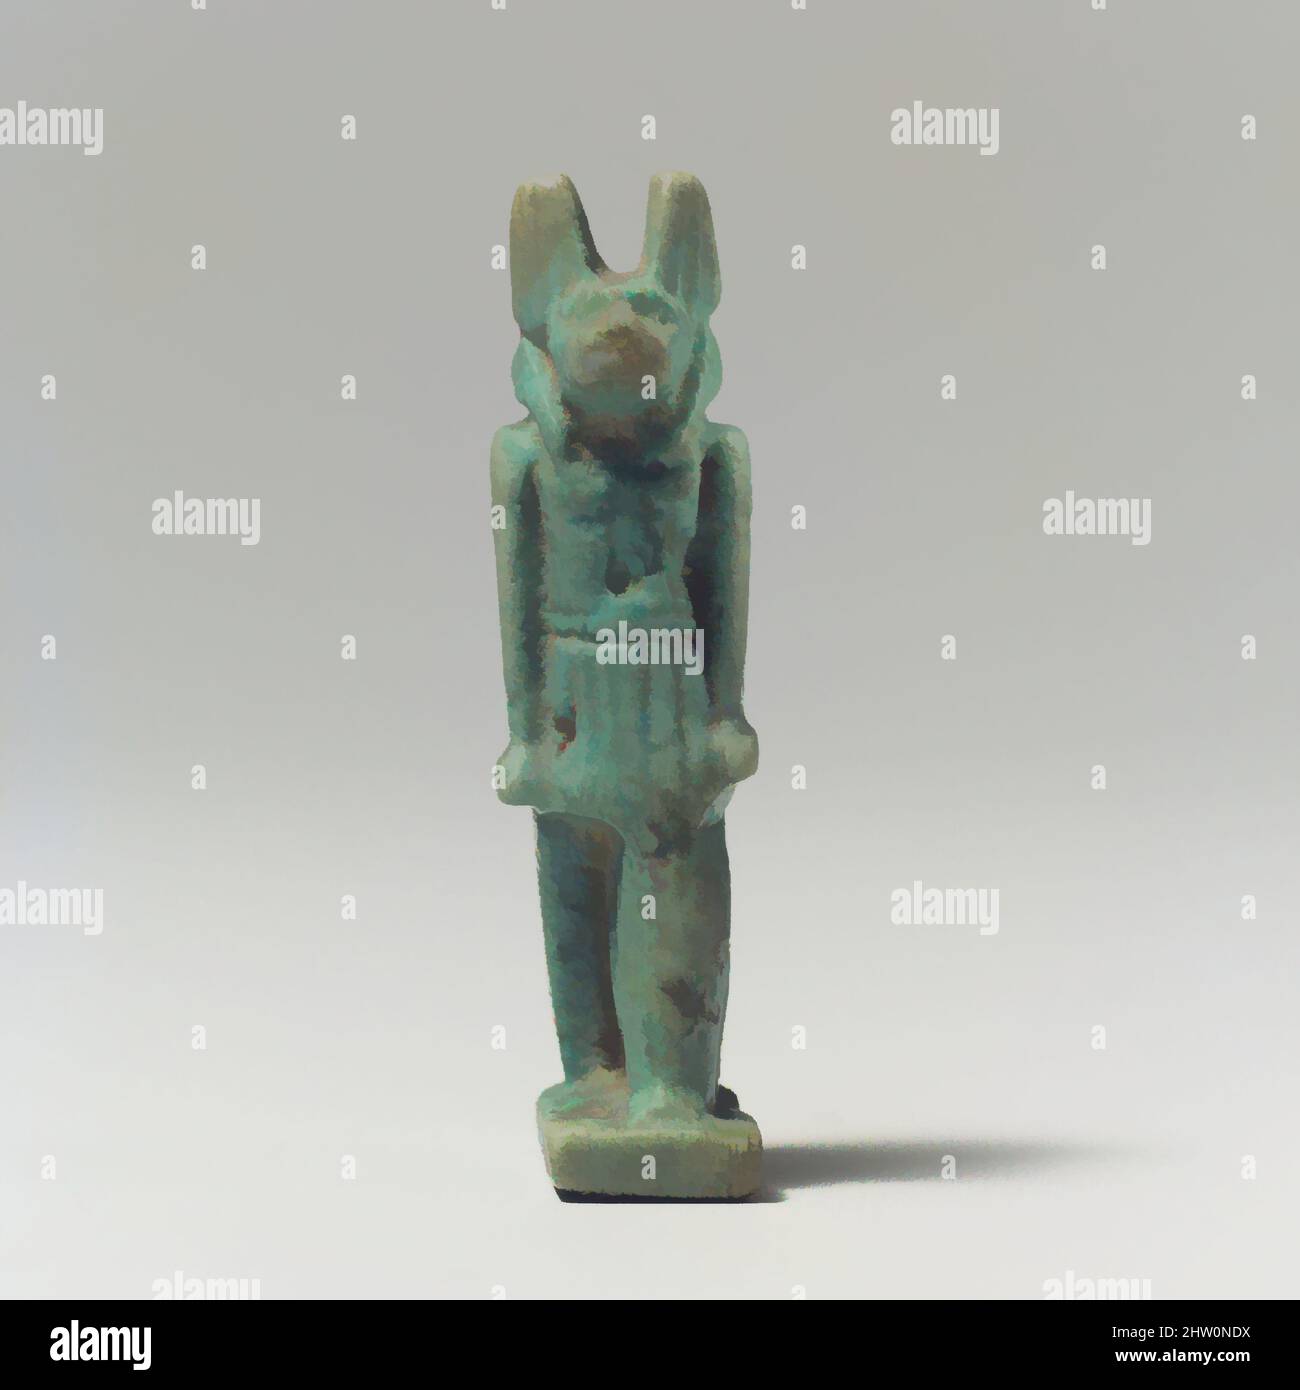 Art inspired by Anubis Amulet, Late Period–Ptolemaic Period, 664–30 B.C., From Egypt, Faience, H. 4.7 cm (1 7/8 in), Funerary amulets often were made in the form of gods who had roles in protecting the mummy. Anubis, the jackal-headed god, oversaw the embalming process. He also bore, Classic works modernized by Artotop with a splash of modernity. Shapes, color and value, eye-catching visual impact on art. Emotions through freedom of artworks in a contemporary way. A timeless message pursuing a wildly creative new direction. Artists turning to the digital medium and creating the Artotop NFT Stock Photo